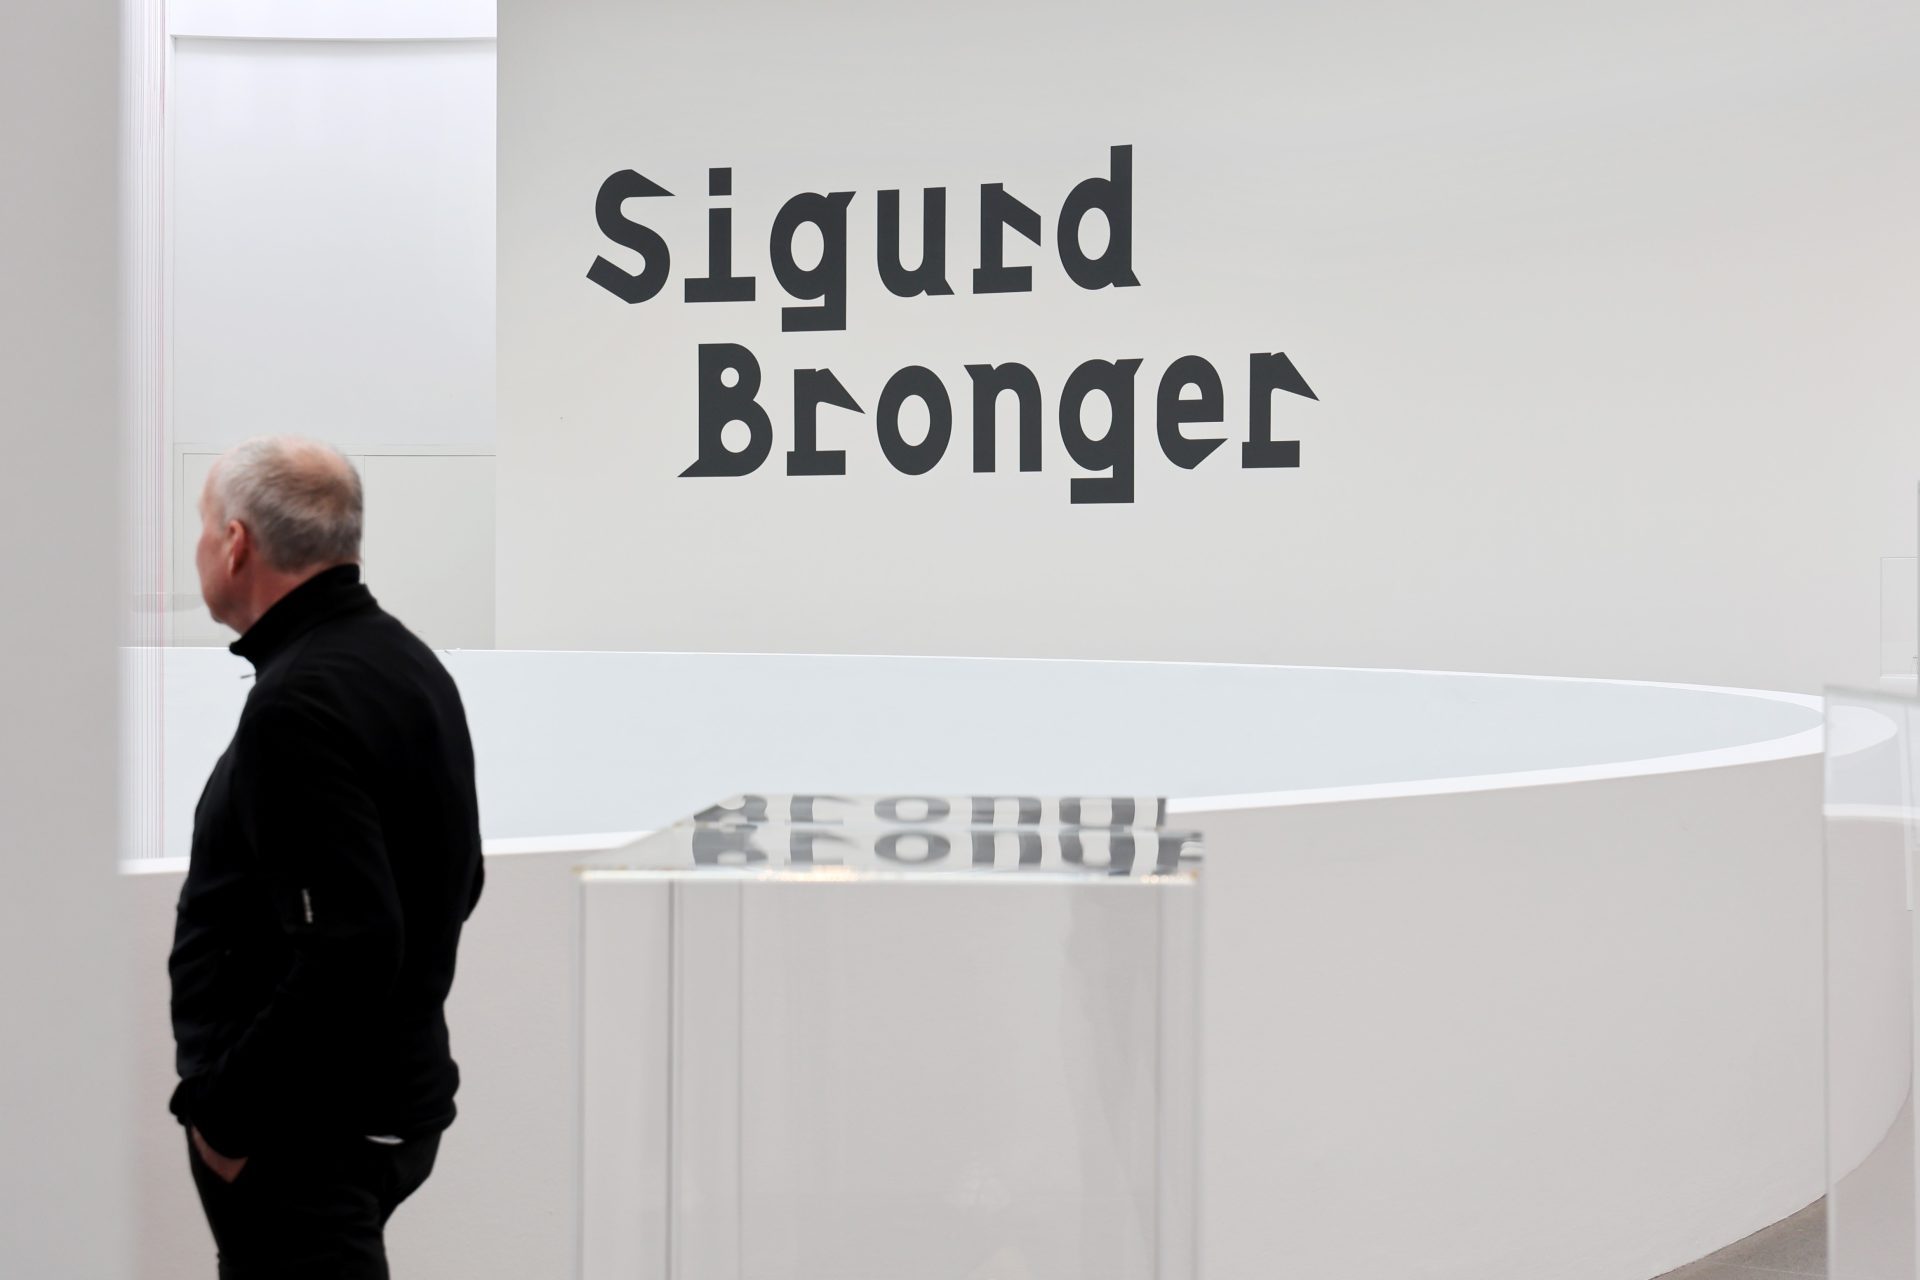 A man is standing in the Sigurd Bronger exhibition. He is wearing a black turtleneck and black trousers. He is depicted from the side and moves through the room. His face is unrecognisable. He has brown hair and is bald. The title of the exhibition can be seen on the wall in the background.